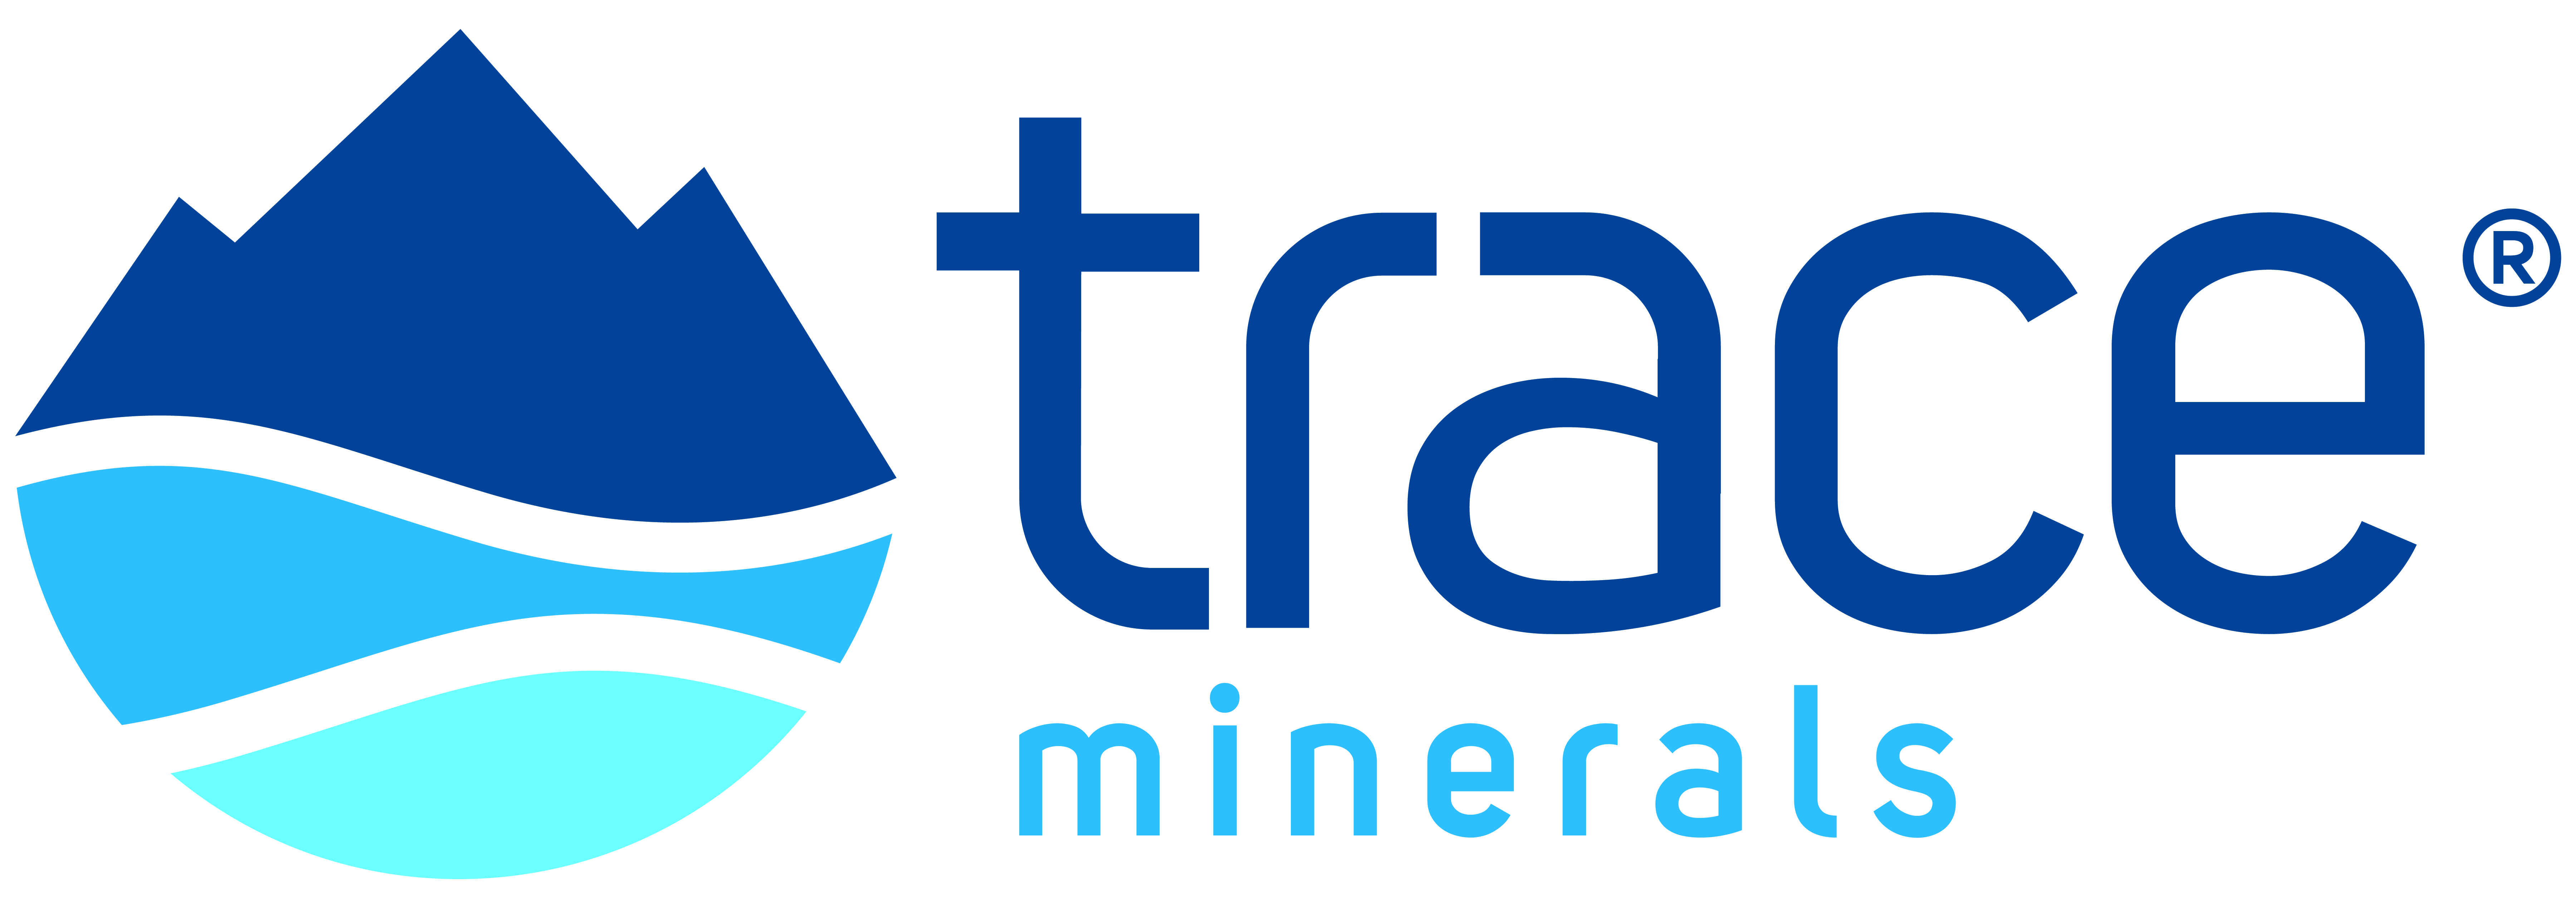 Featured Image for Trace Minerals